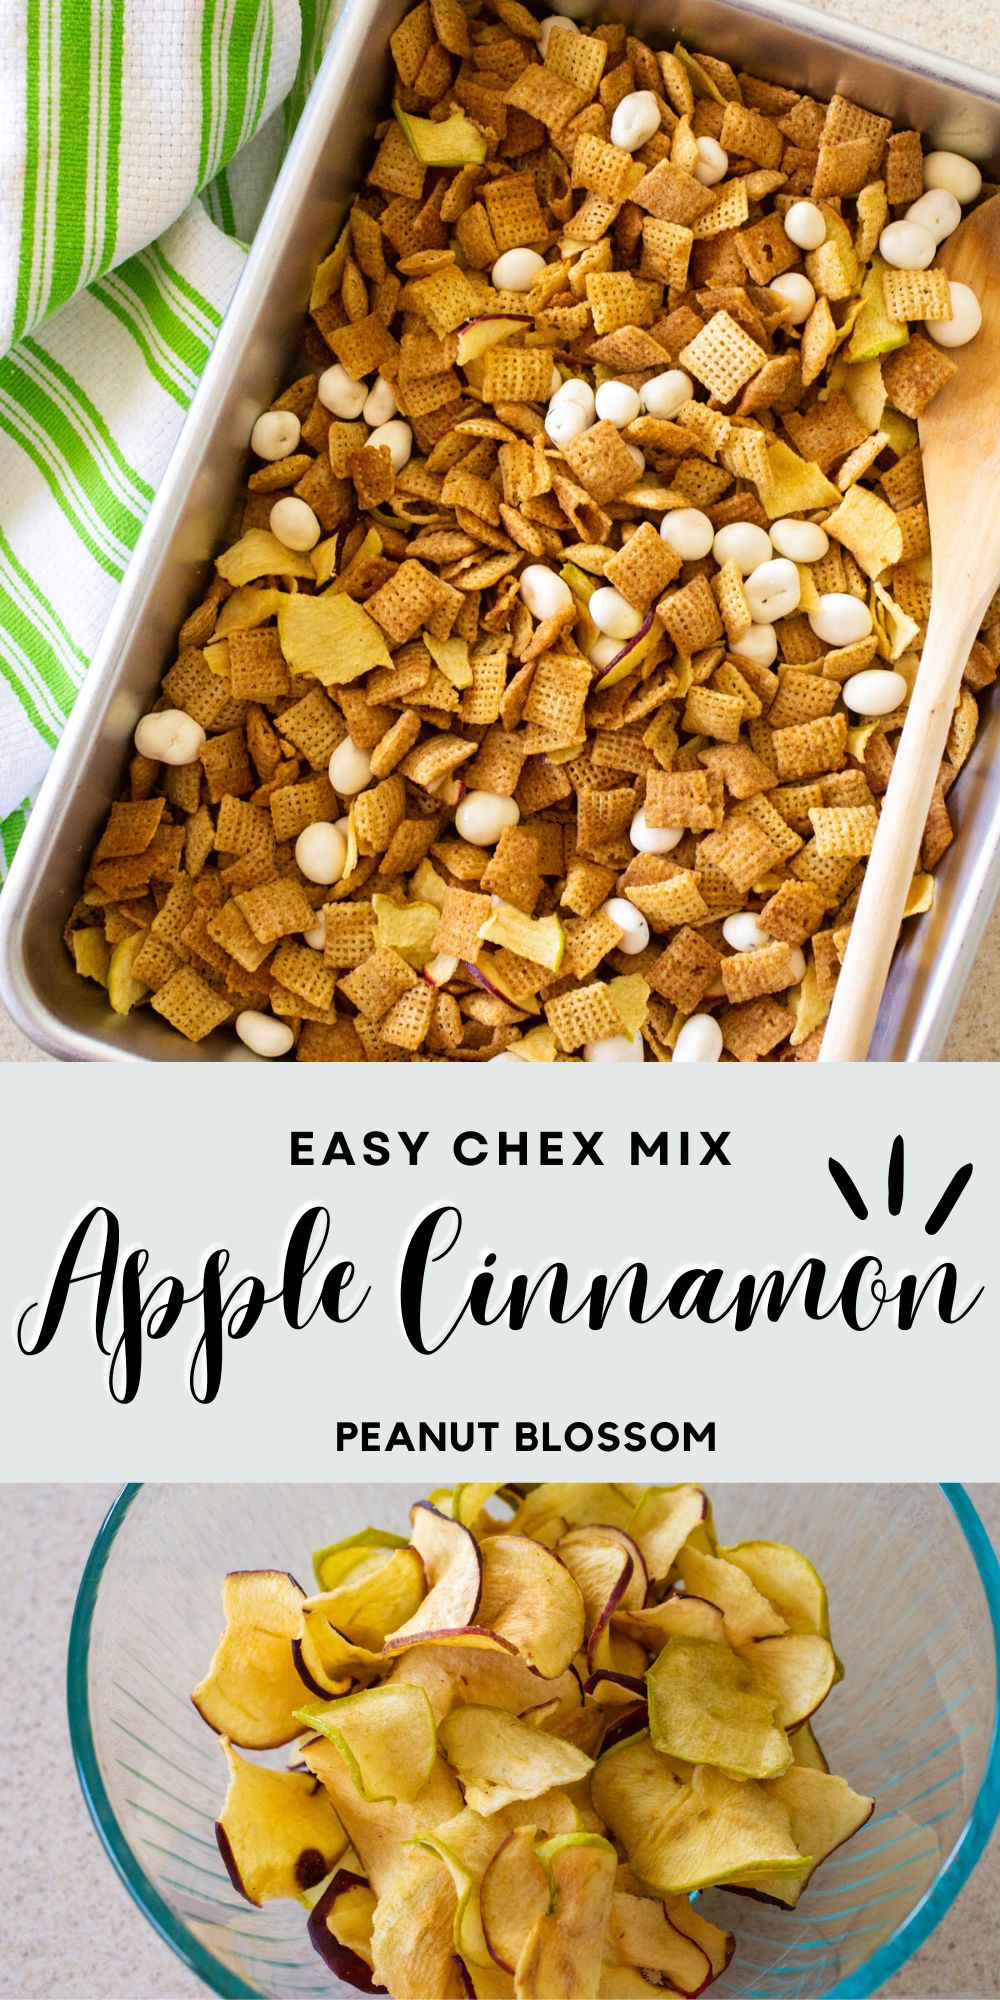 The photo collage shows the Chex mix in a serving pan next to a photo of dried apple chips.